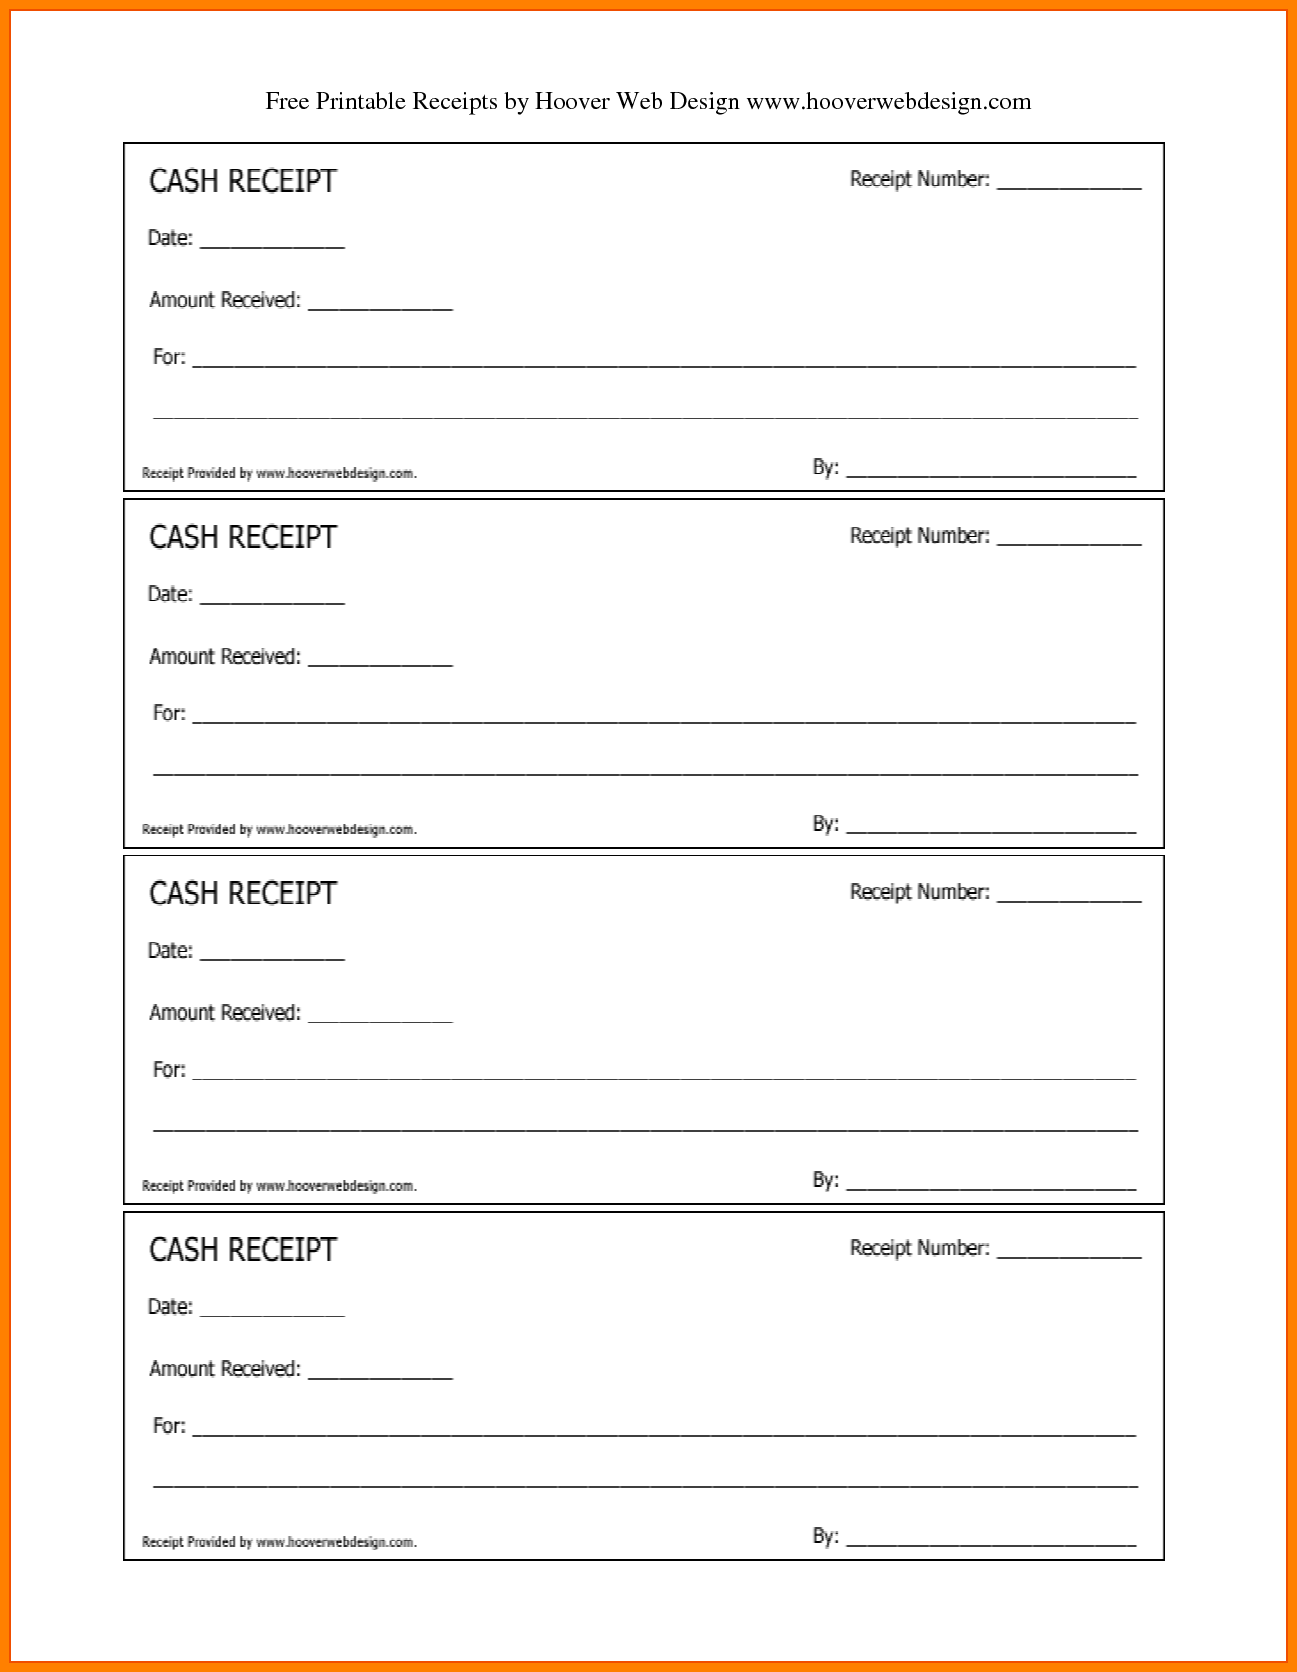 fantastic-blank-receipt-of-payment-template-glamorous-receipt-templates